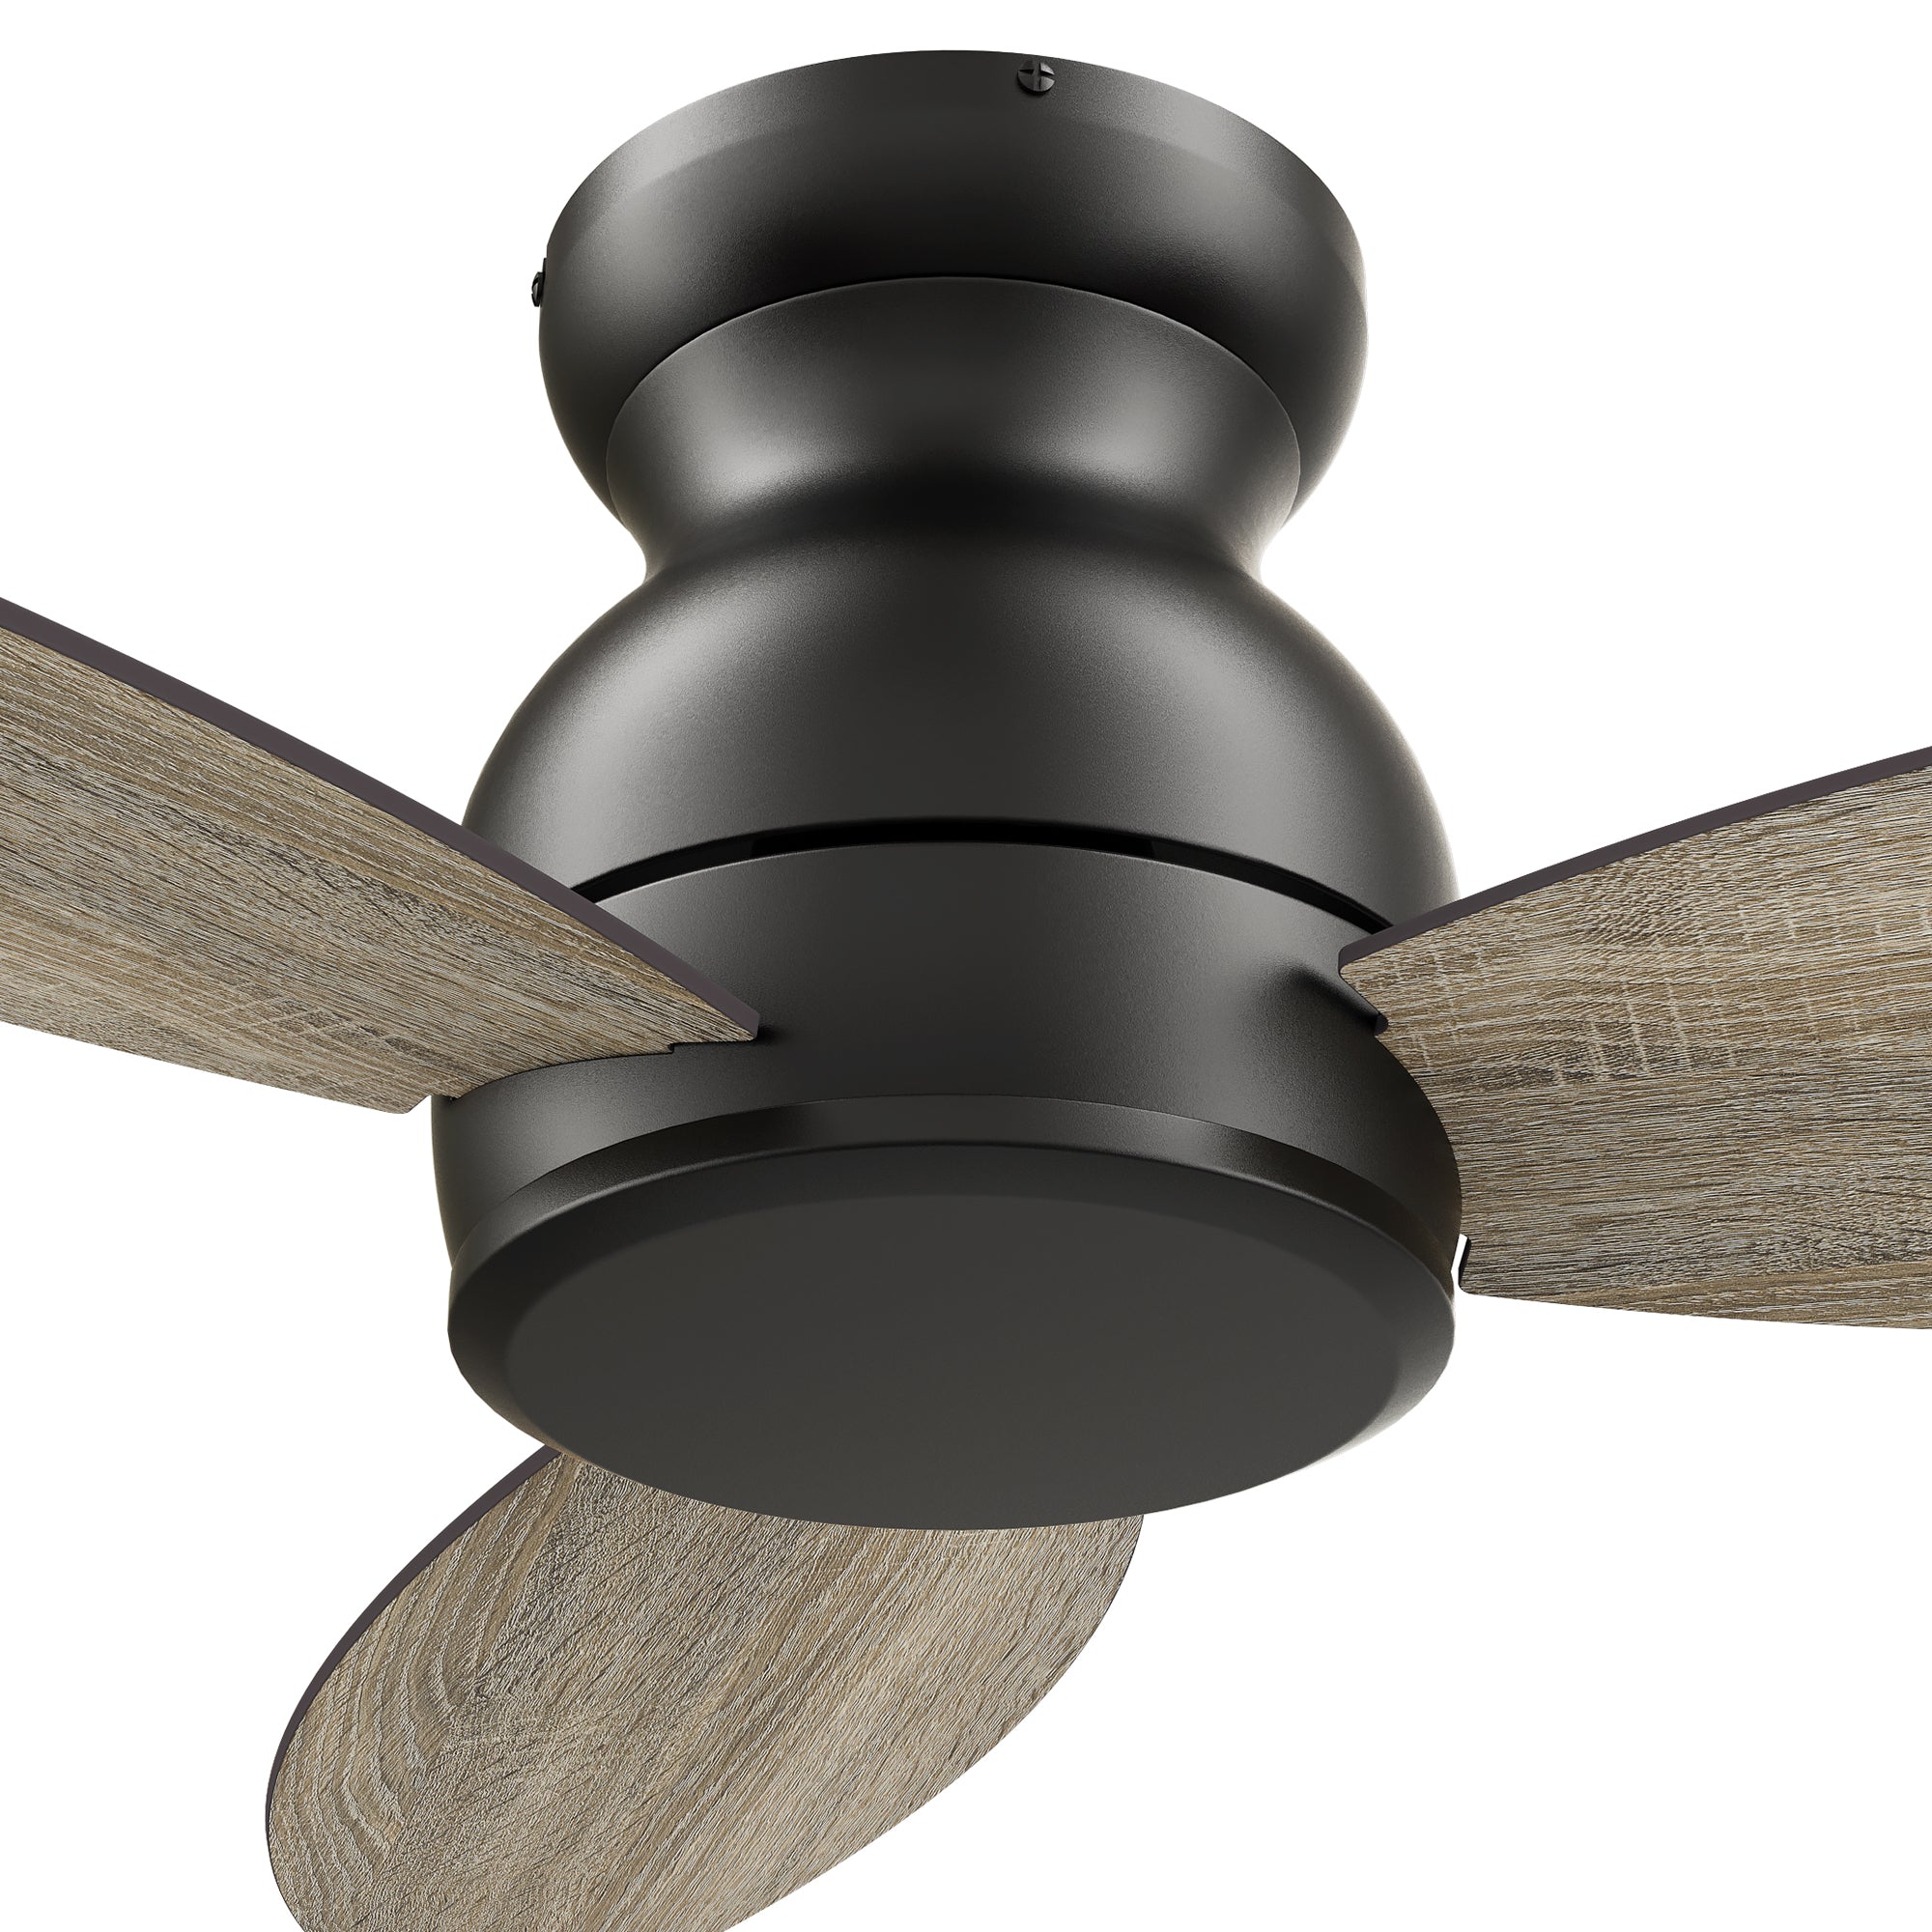 This Osborn48&#39;&#39;ceiling fan keeps your space cool and stylish. It is a soft modern masterpiece perfect for your indoor living spaces. This ceiling fan is a simplicity designing with Black finish, use elegant Plywood blades. The fan features remote control.